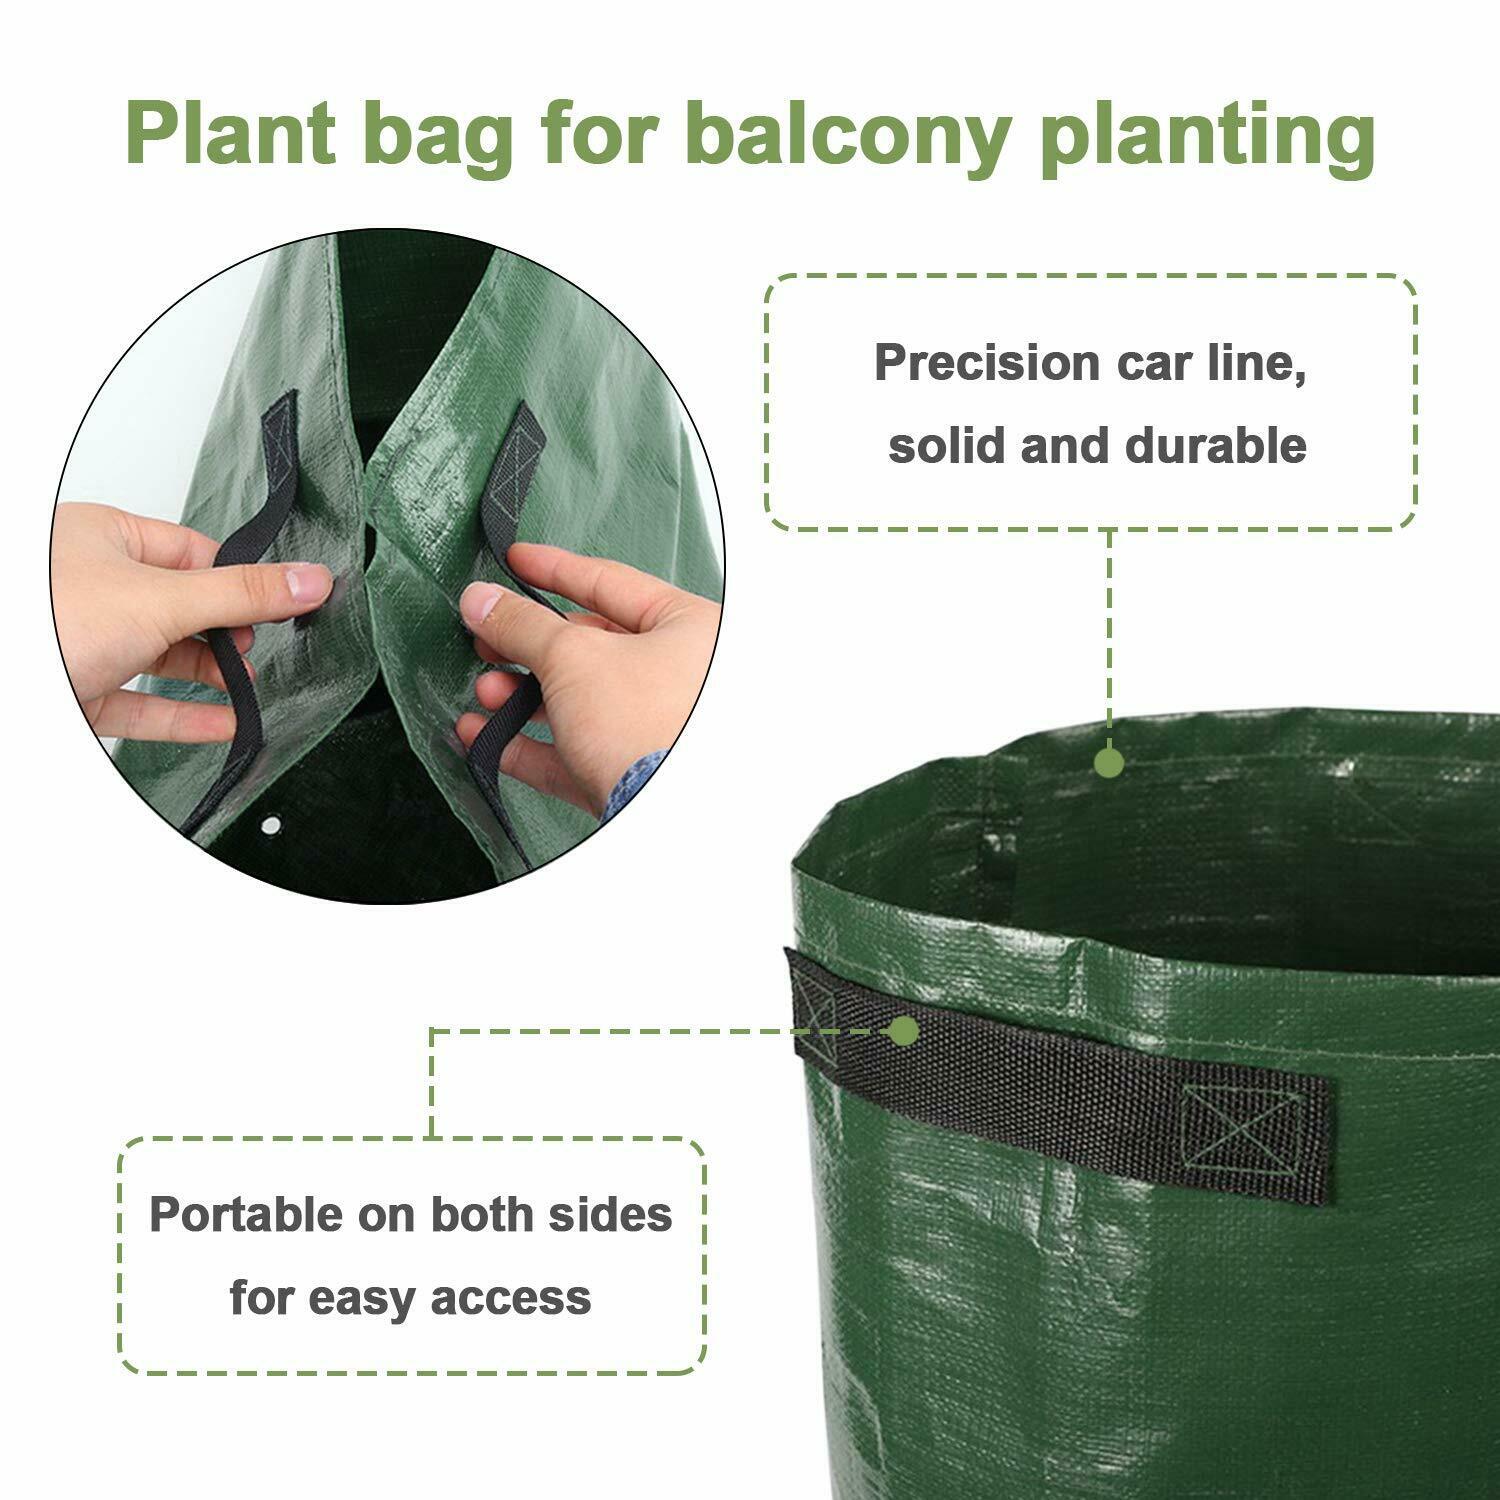 Potato Grow Bags Planters Outdoor Garden Vegetable Tomato Plant Containers Pots - image 5 of 13